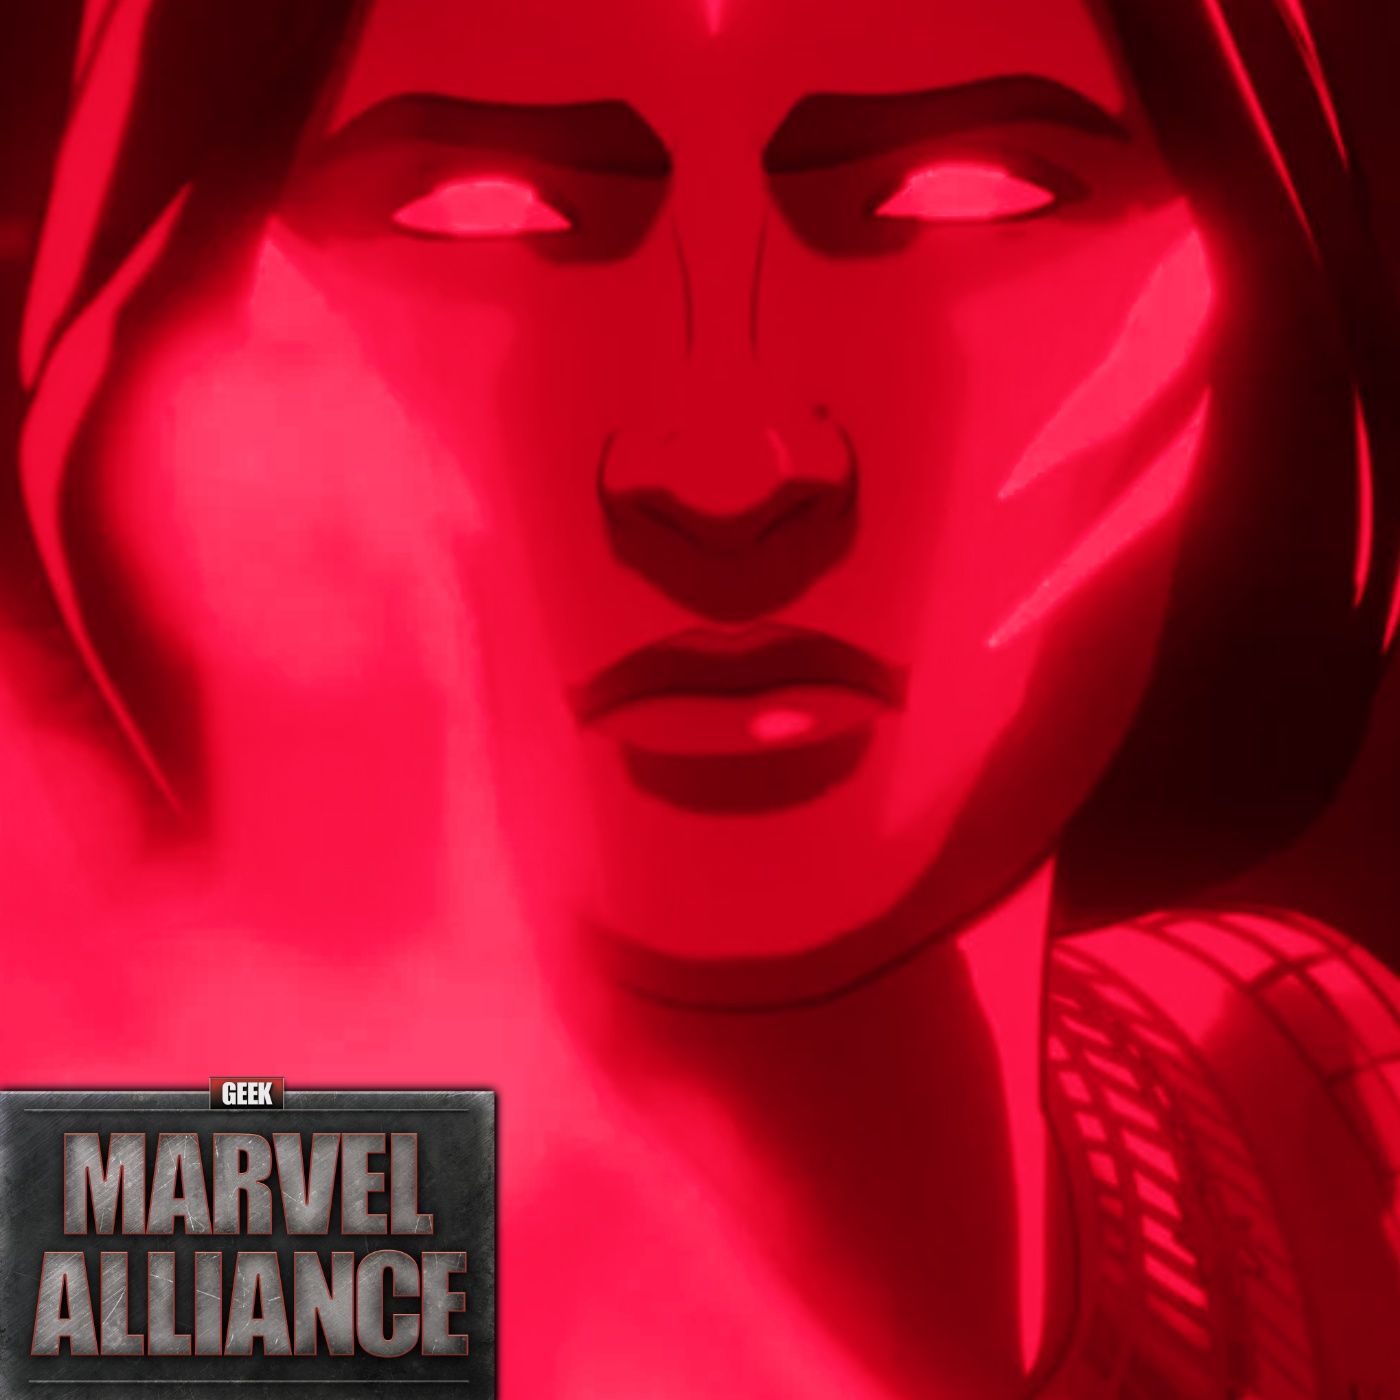 What if...? Season 2 Episodes 6-9 Spoilers Review : Marvel Alliance Vol. 197